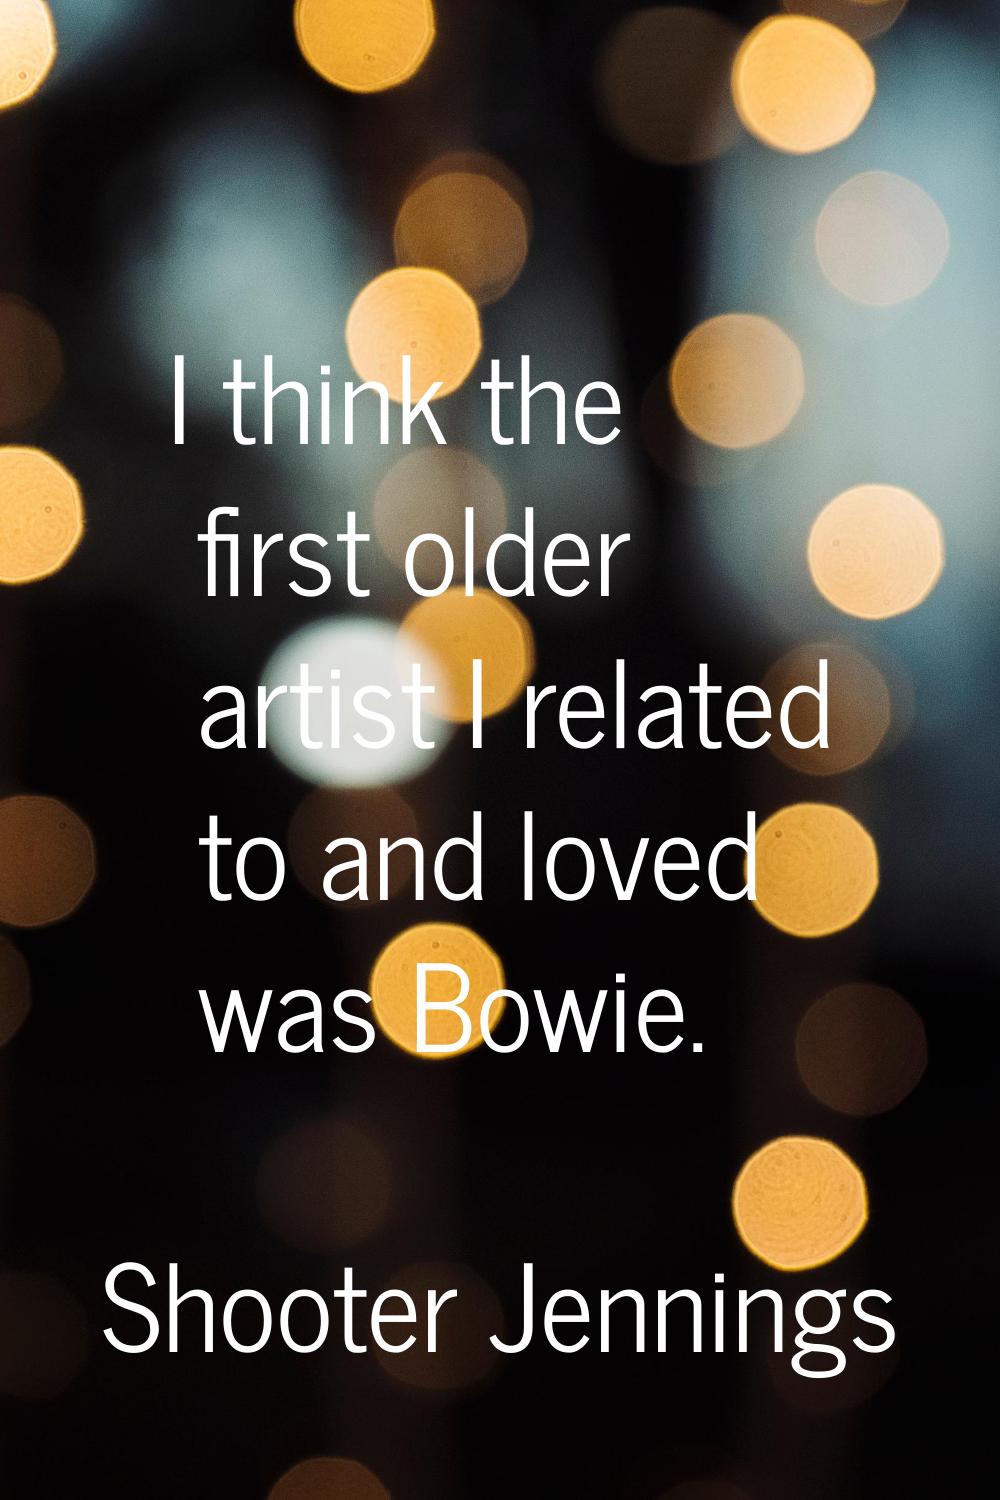 I think the first older artist I related to and loved was Bowie.